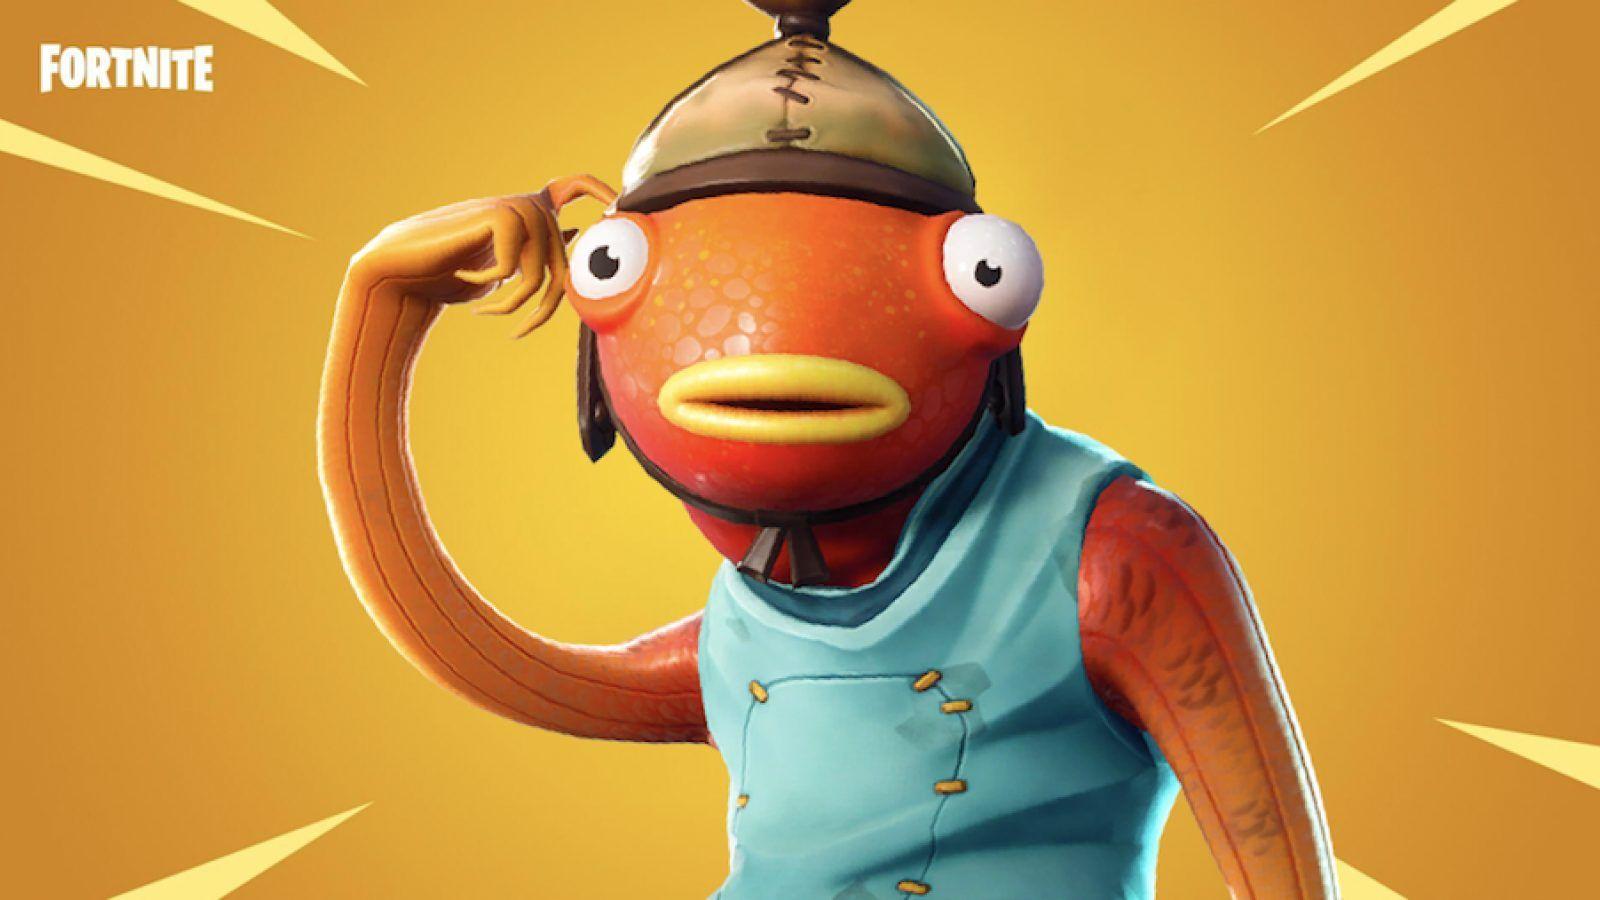 Fortnite players think they've seen Fishstick somewhere before